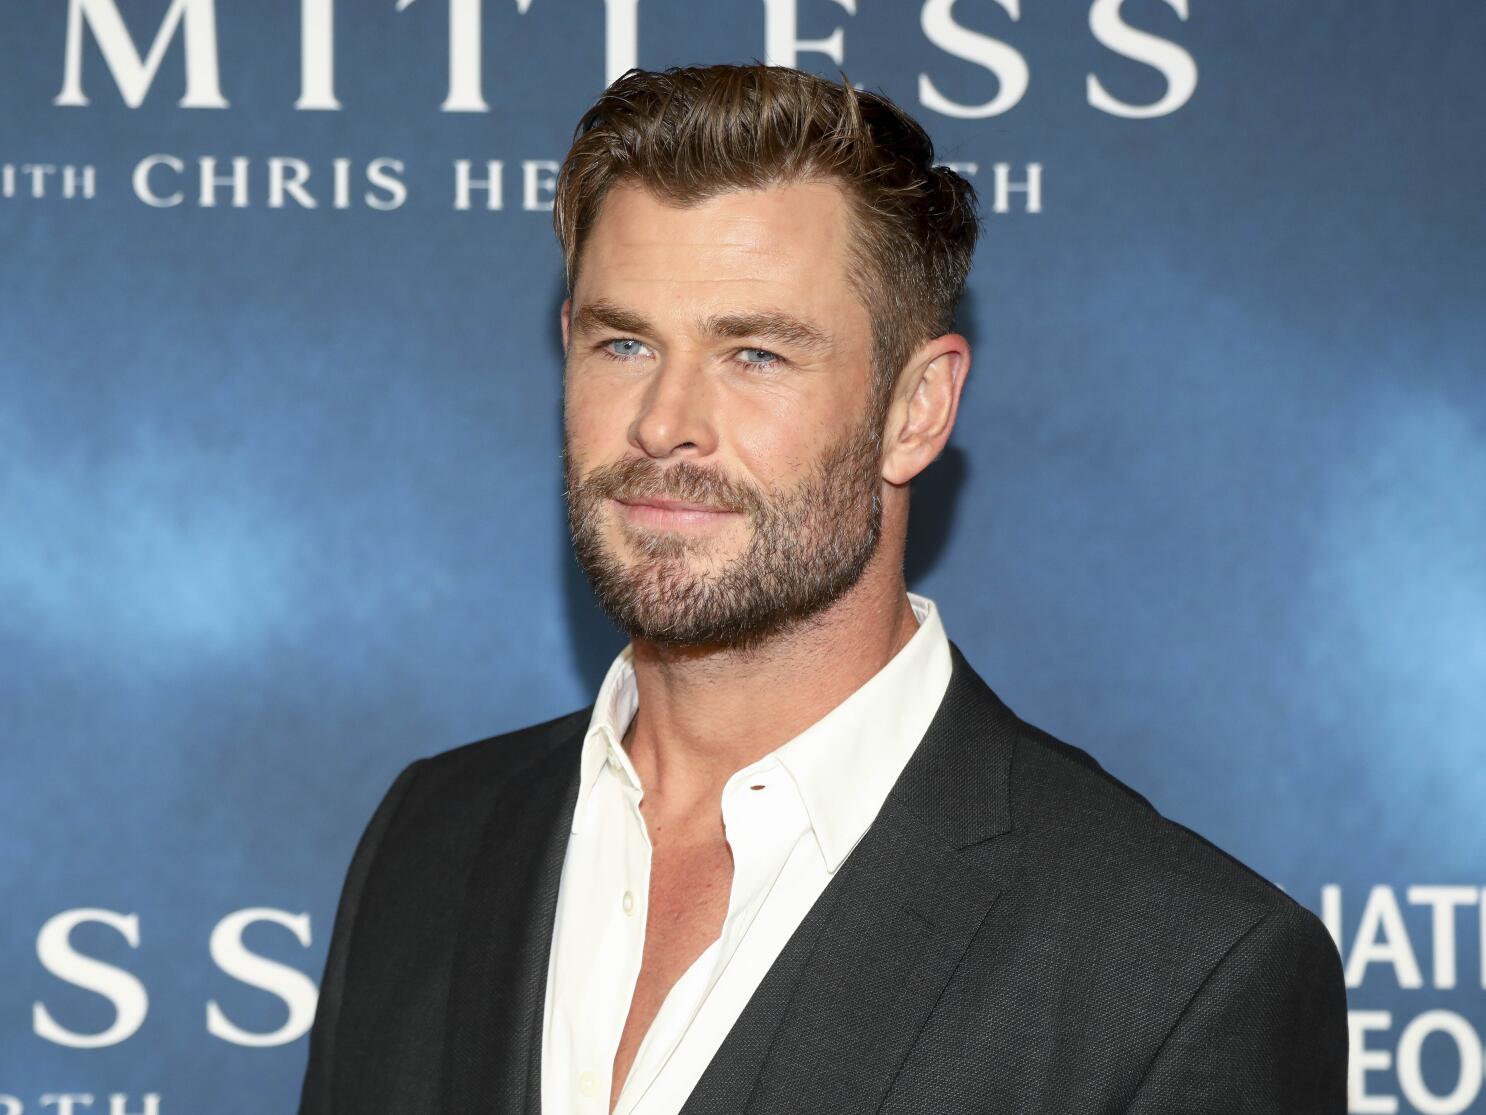 Actor Chris Hemsworth attends the premiere of National Geographic's original series "Limitless with Chris Hemsworth" at Jazz at Lincoln Center on Tuesday, Nov. 15, 2022, in New York. (Photo by Andy Kropa/Invision/AP)